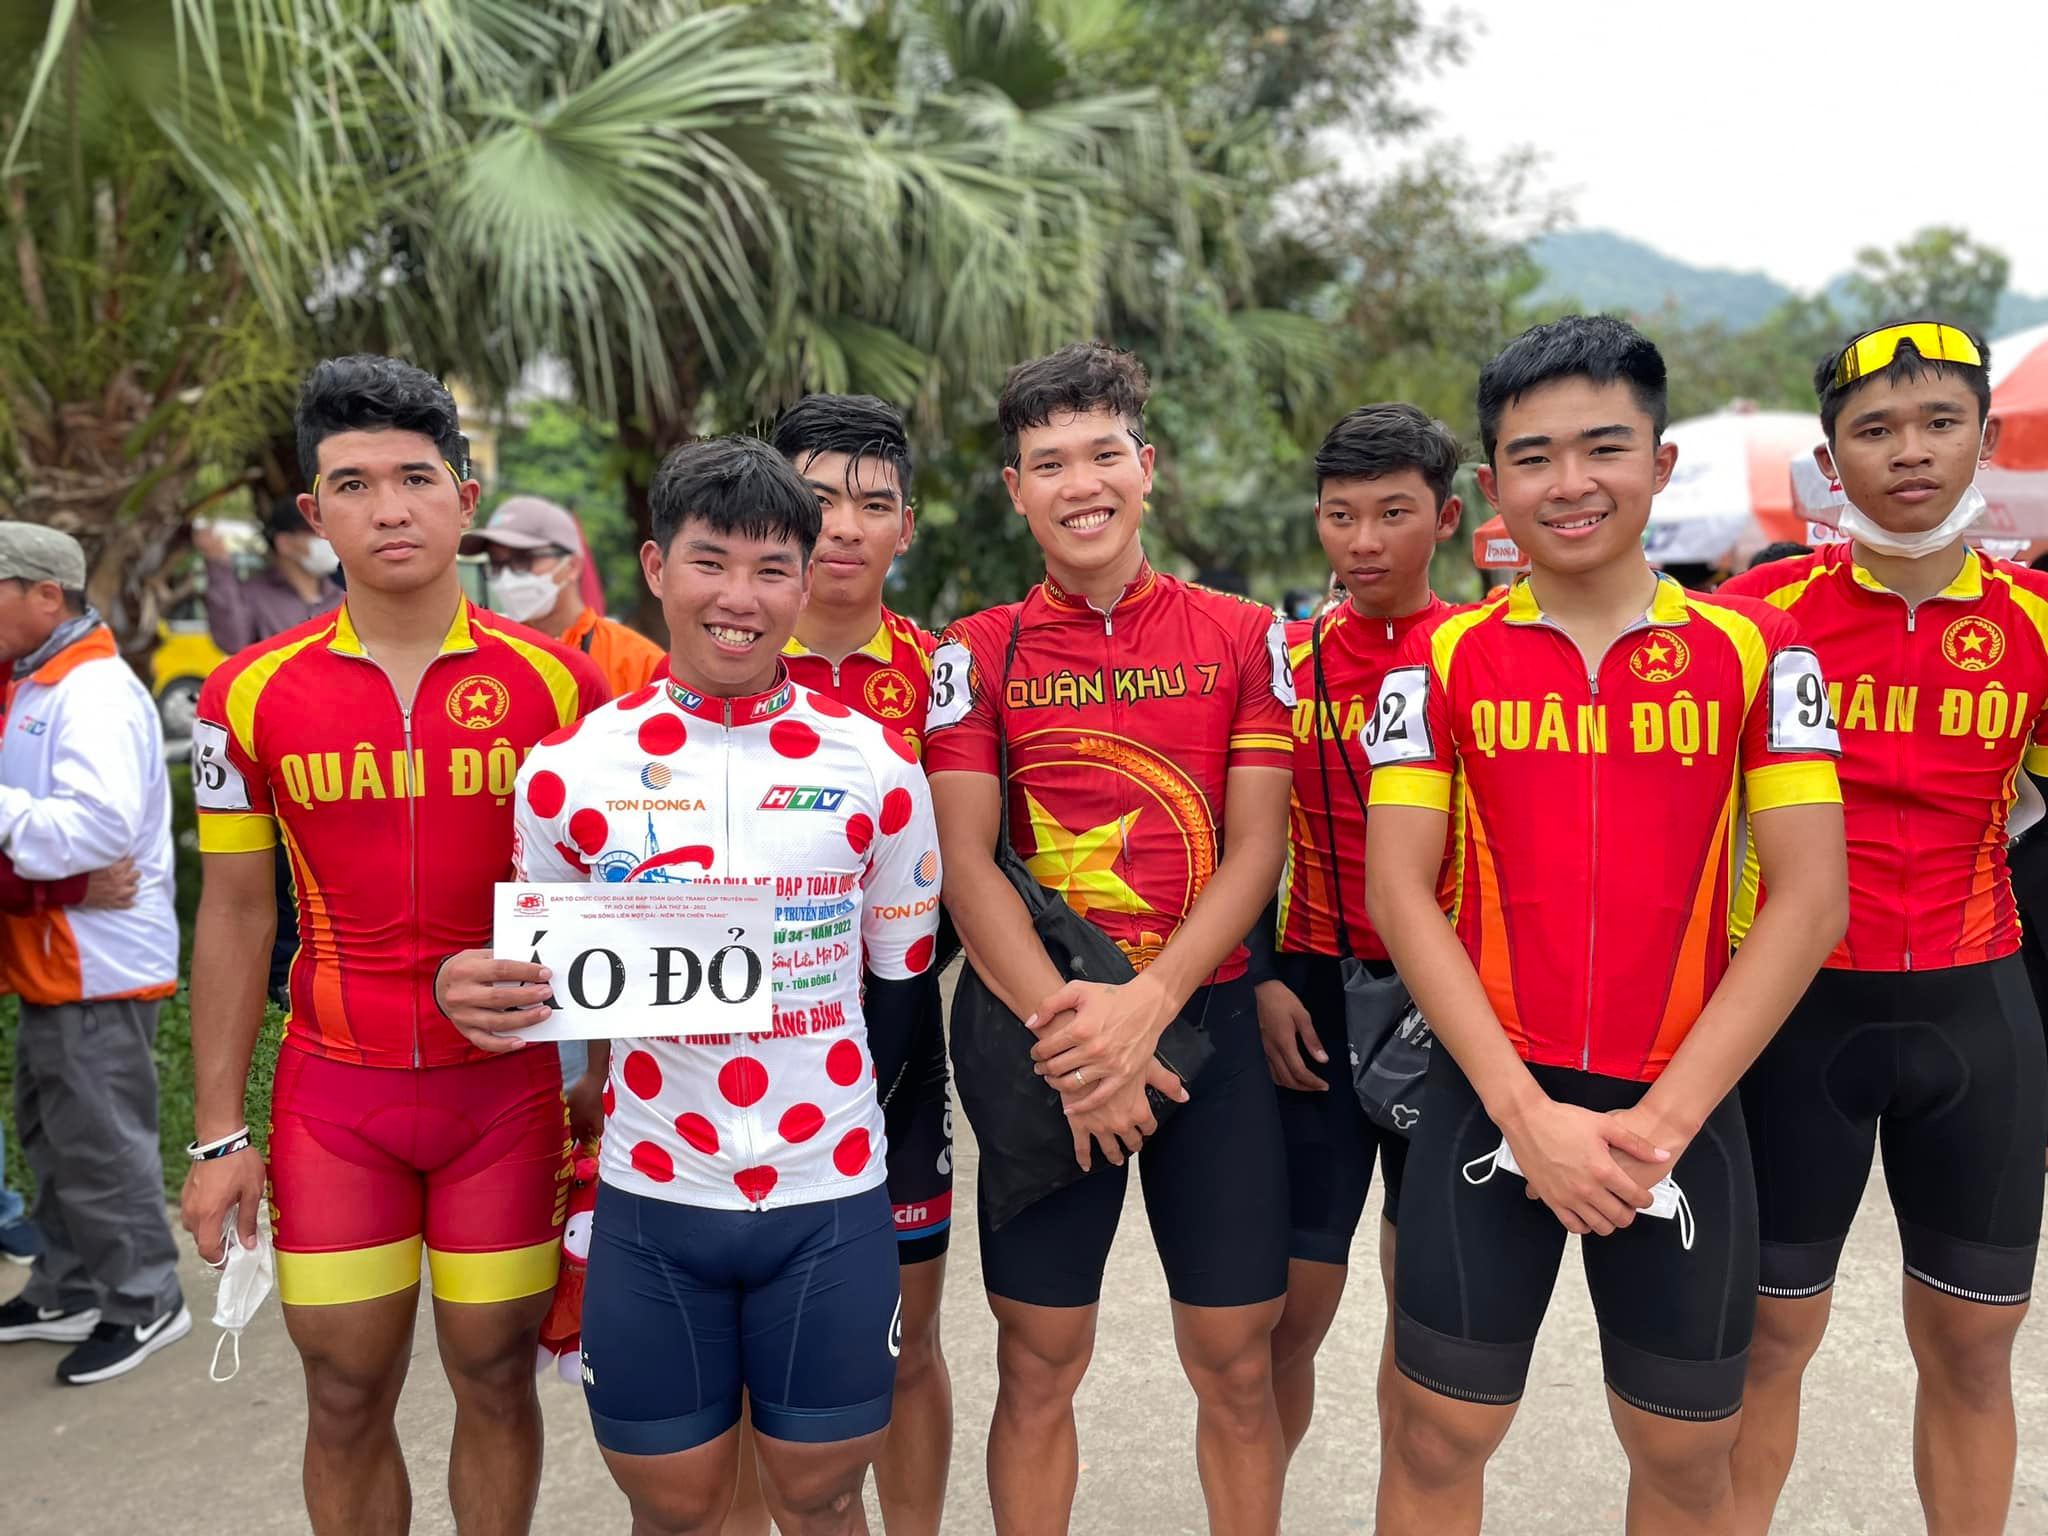 Nguyen Van Nha of Quan Khu 7 wins the polka dot jersey of the mountains classification in the ninth stage of the 2022 Ho Chi Minh City TV (HTV) Cup tournament from Nghe An Province to Quang Binh Province, Vietnam, April 15, 2022. Photo: M.Q. / Tuoi Tre